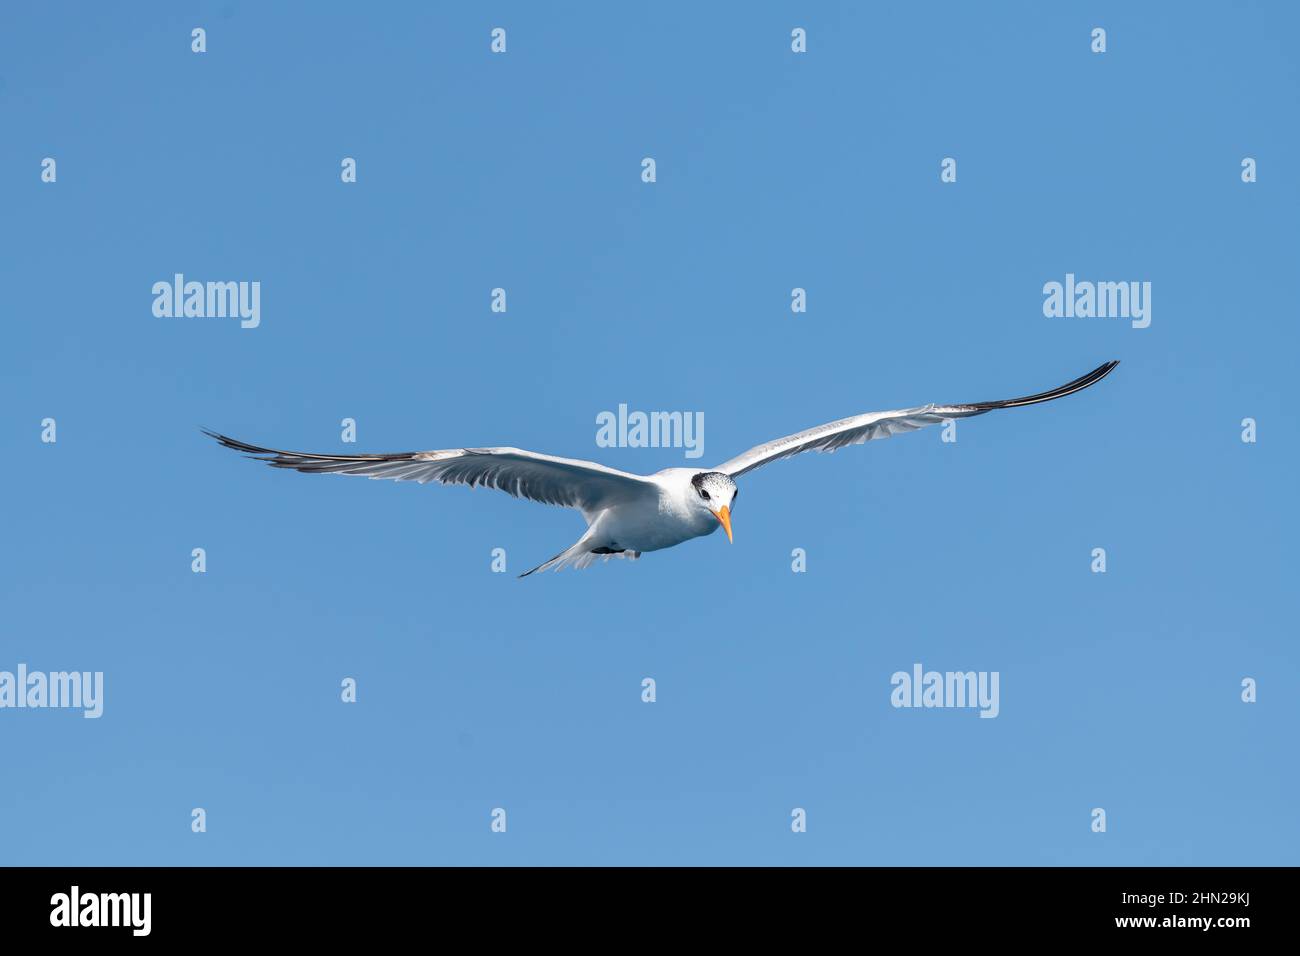 A non-breeding adult Royal Tern (Thalasseus maximus) flying against a clear blue sky in the Florida Keys, USA Stock Photo